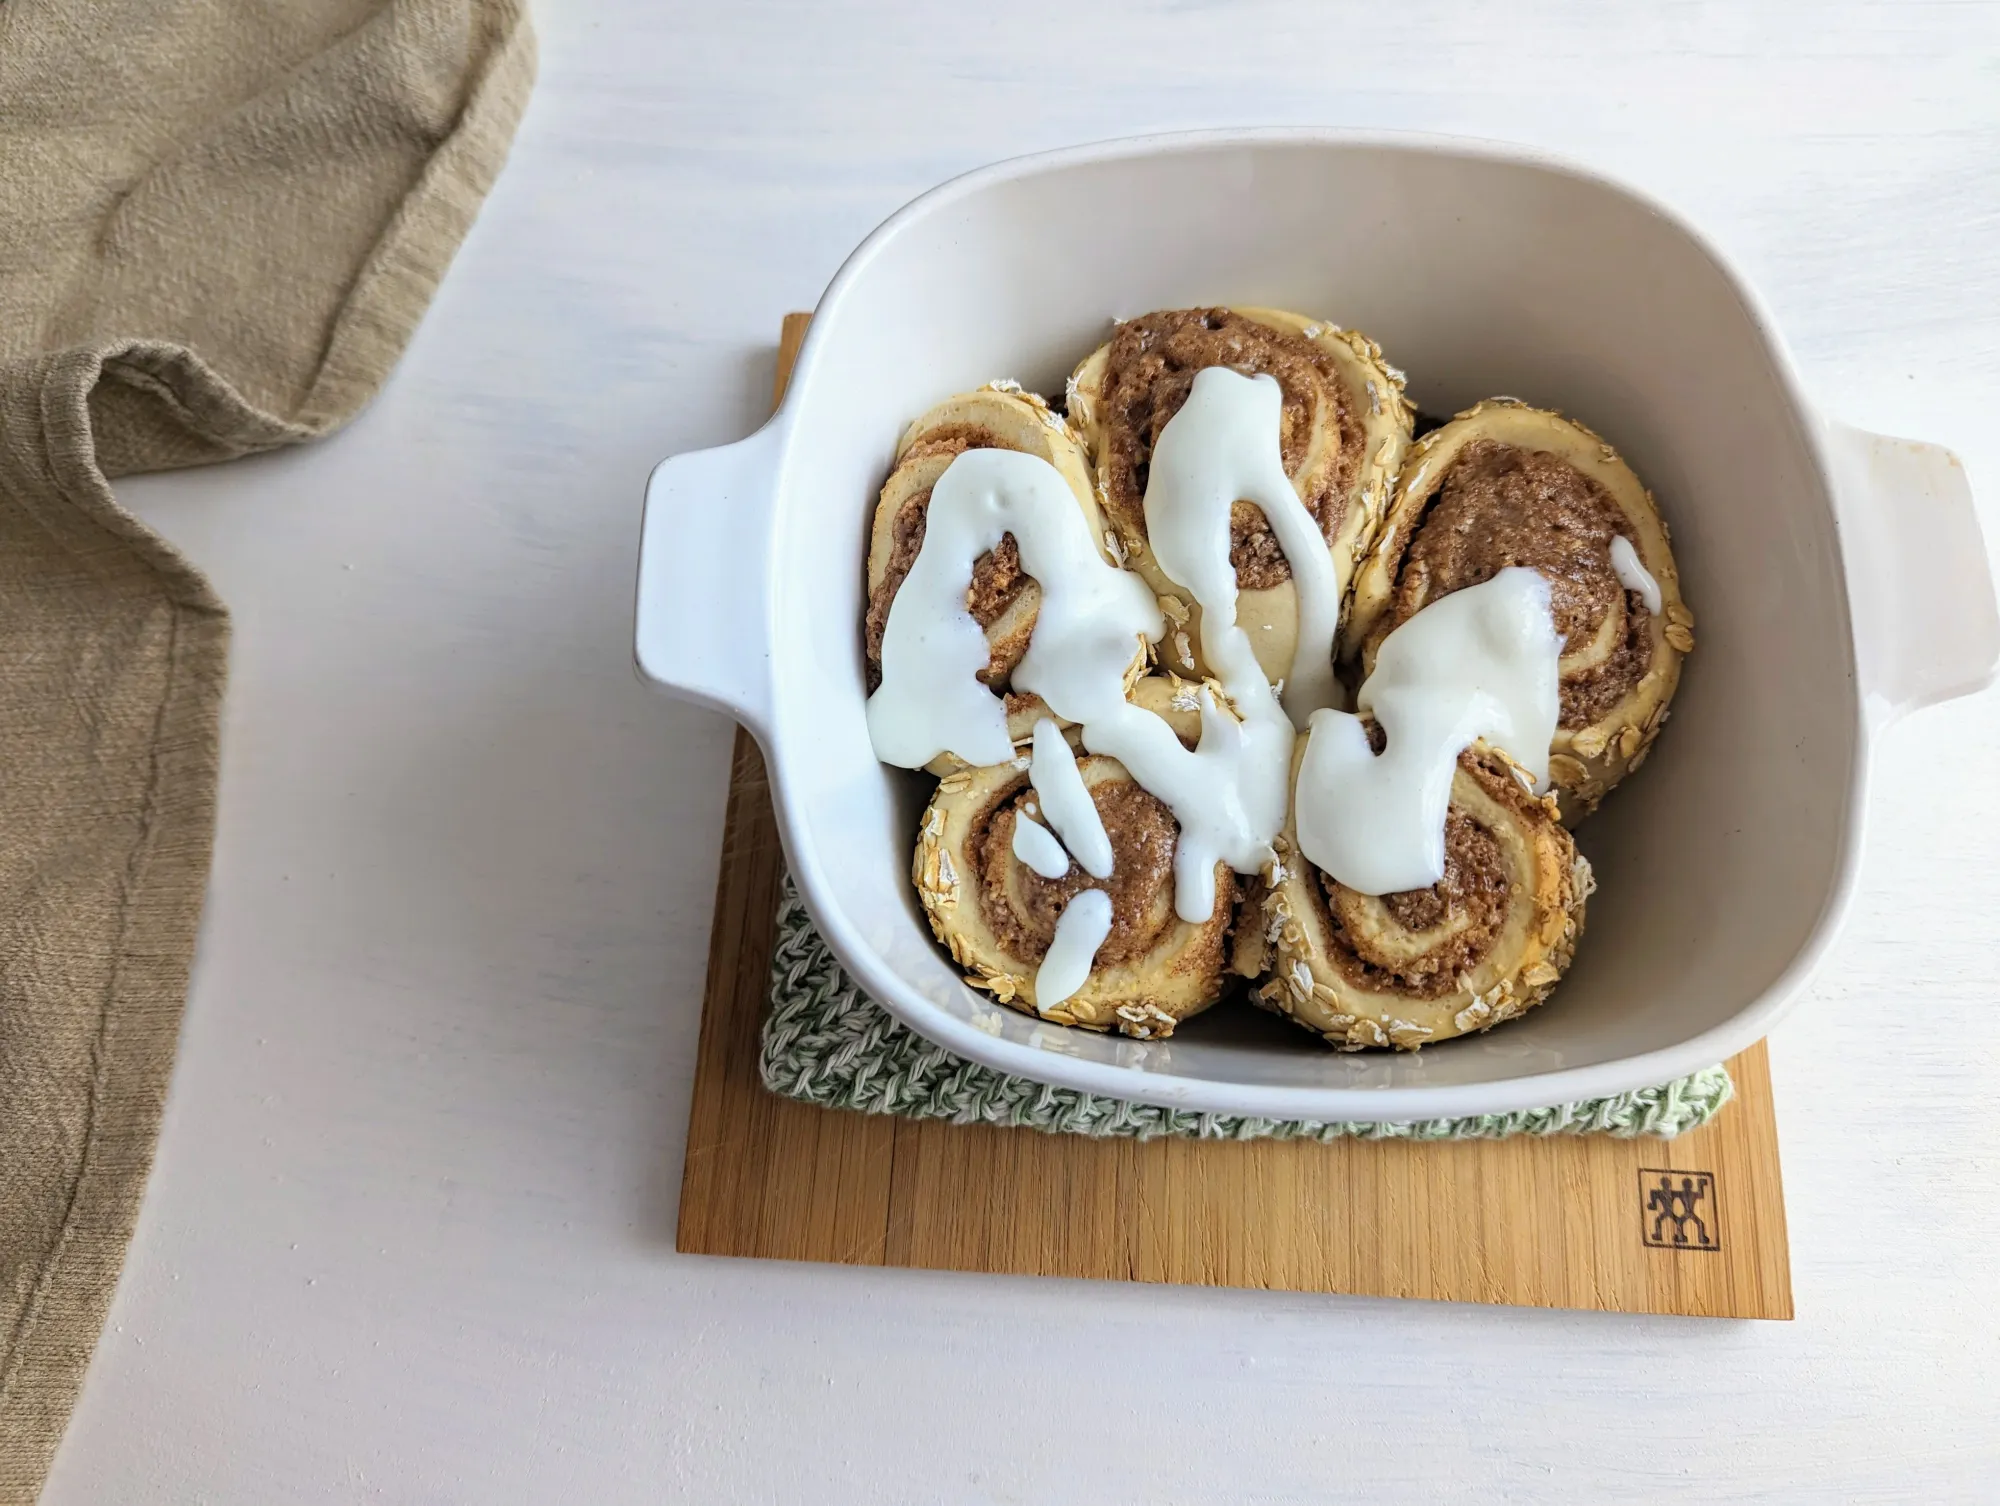 5 cinnamon rolls in a dish covered with a creamy white frosting